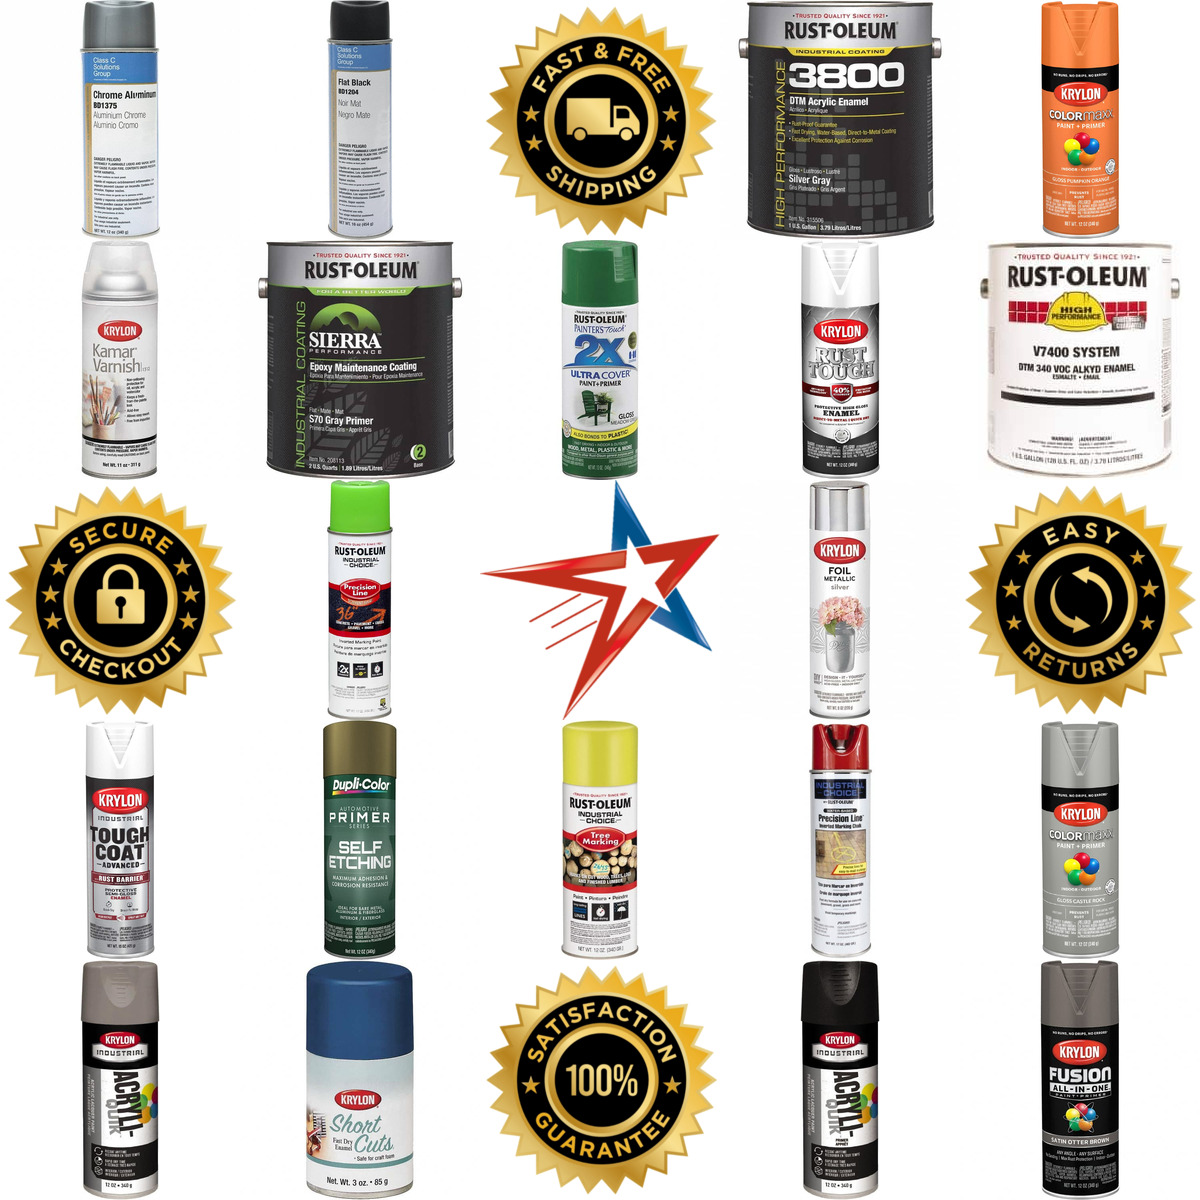 A selection of Paints and Stains products on GoVets